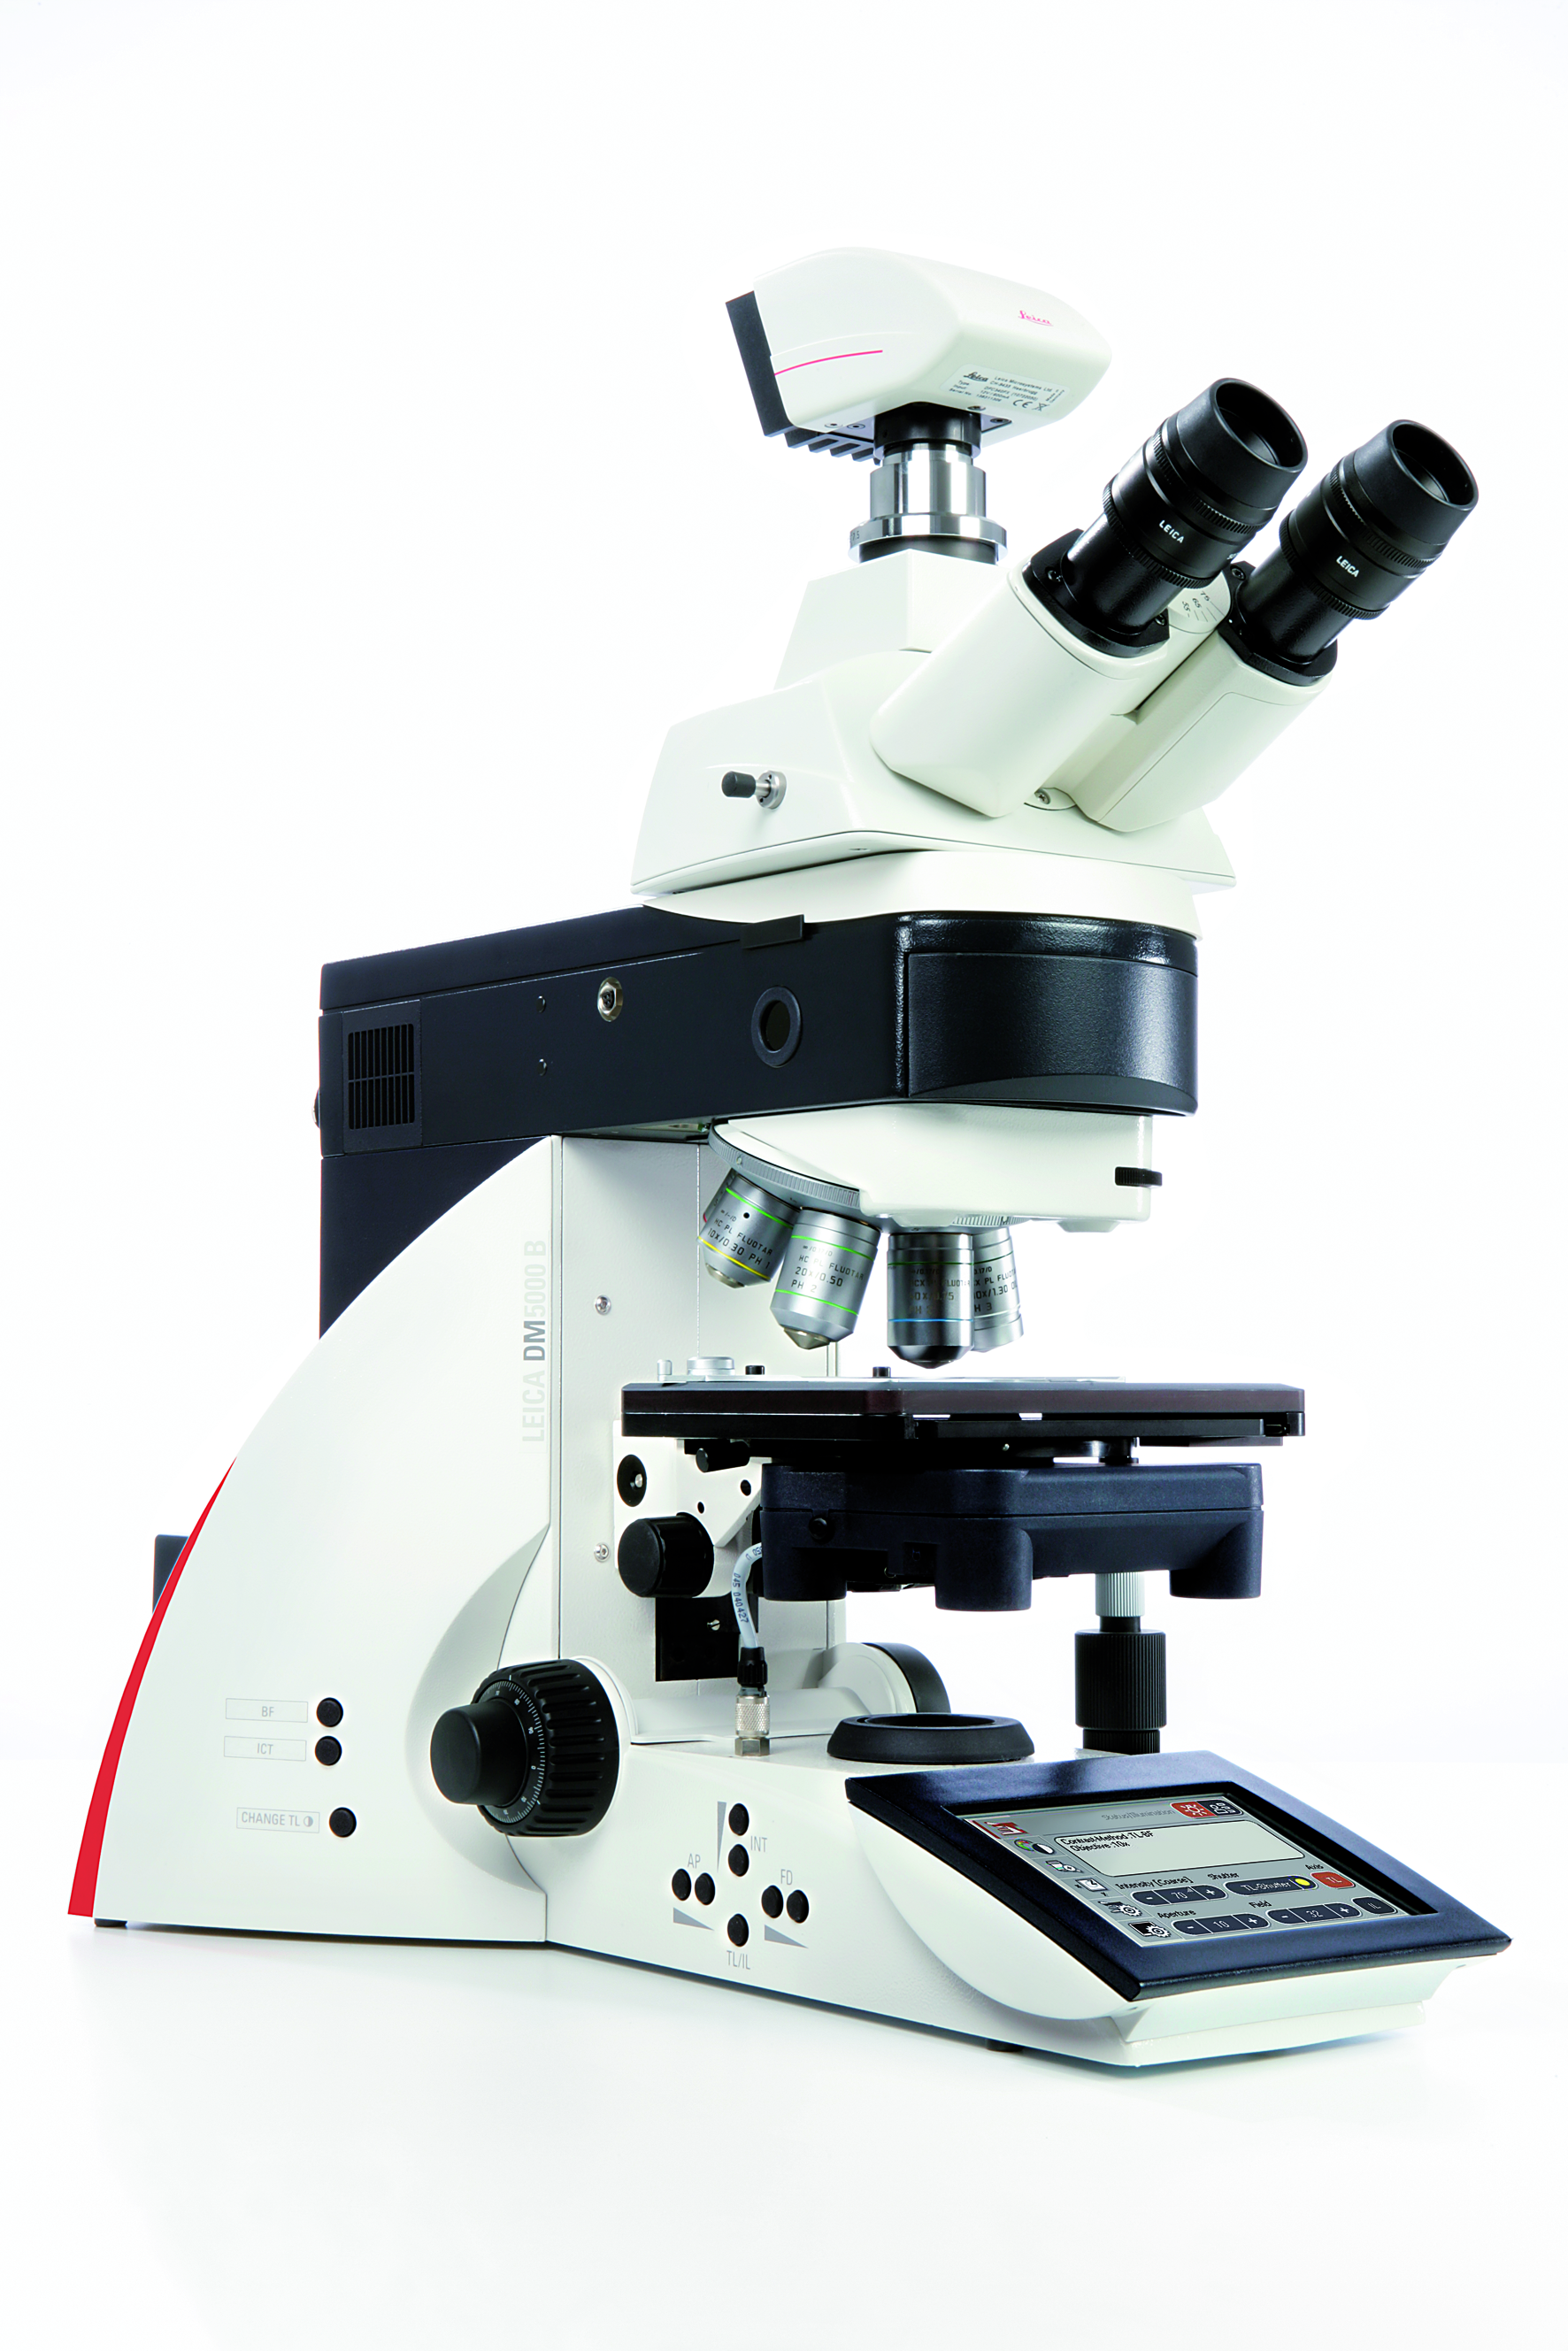 The automated, intuitive Leica DM5000 B, ideal for morphology studies and live cell research, is easy to use